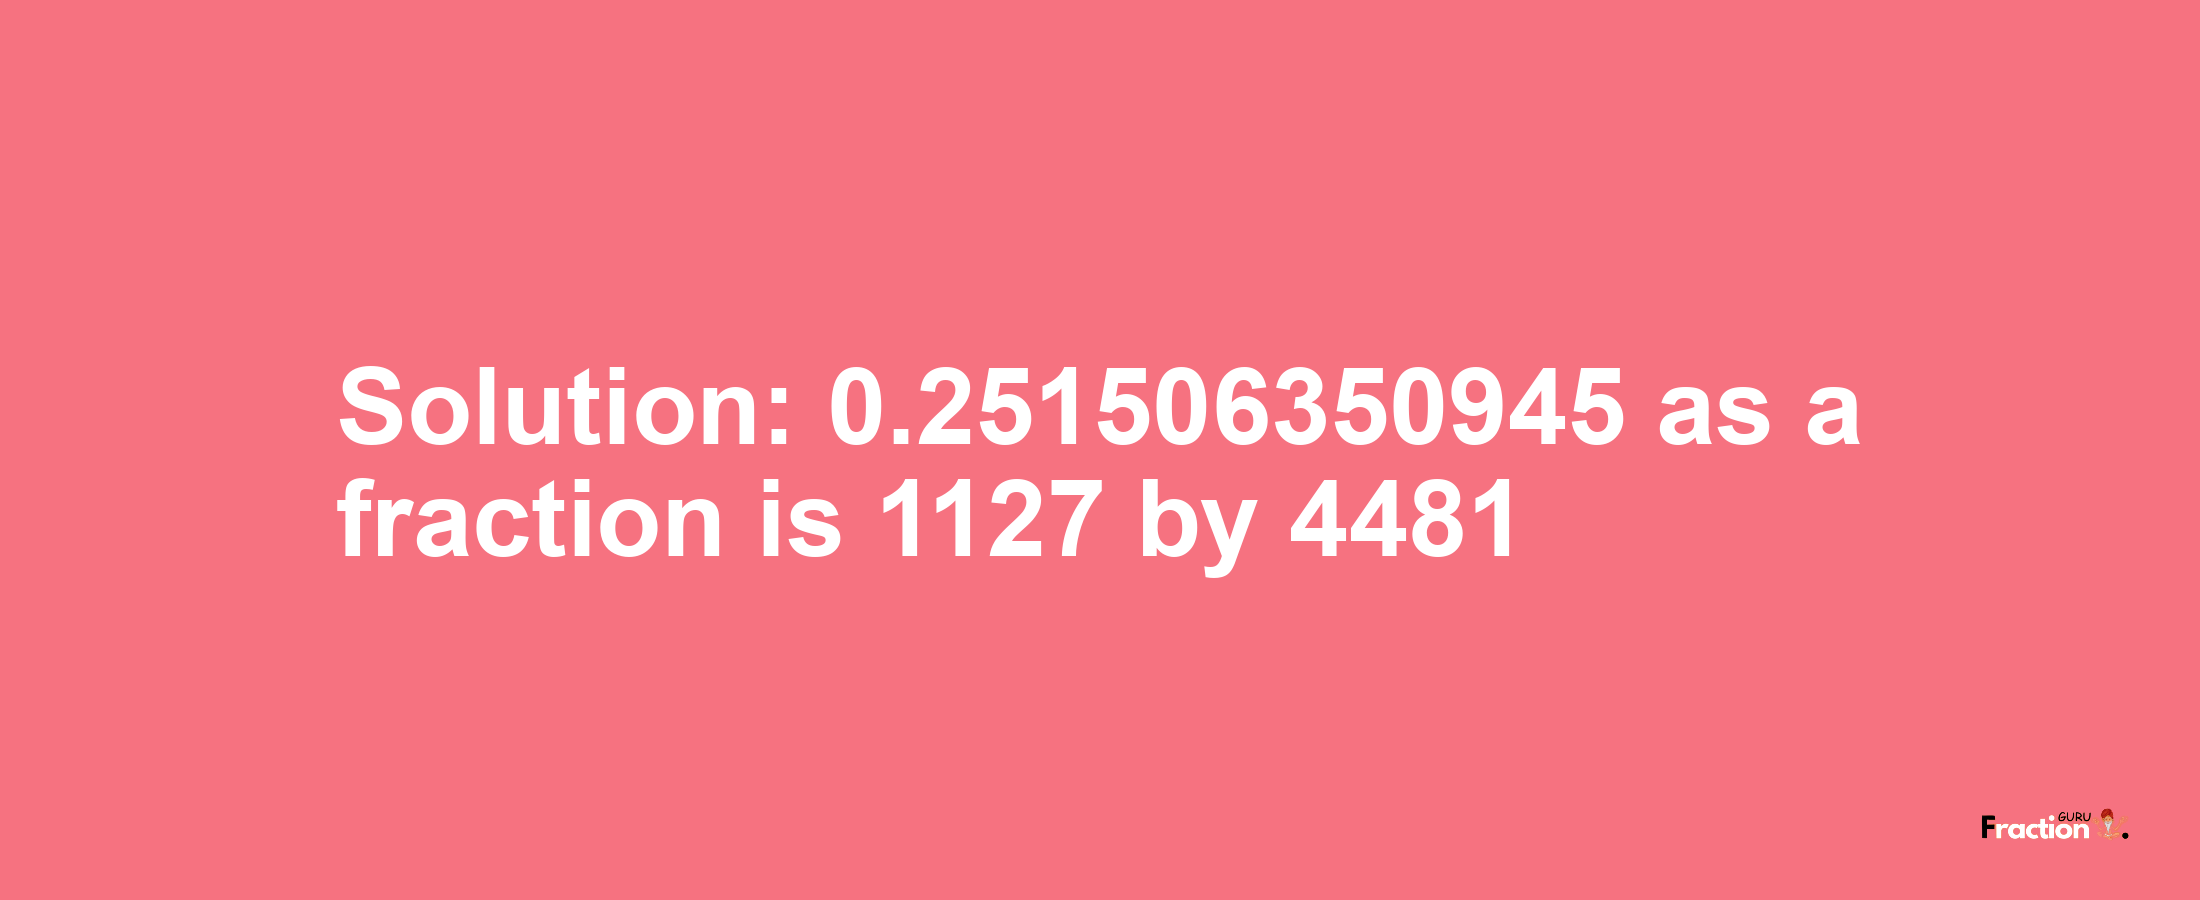 Solution:0.251506350945 as a fraction is 1127/4481